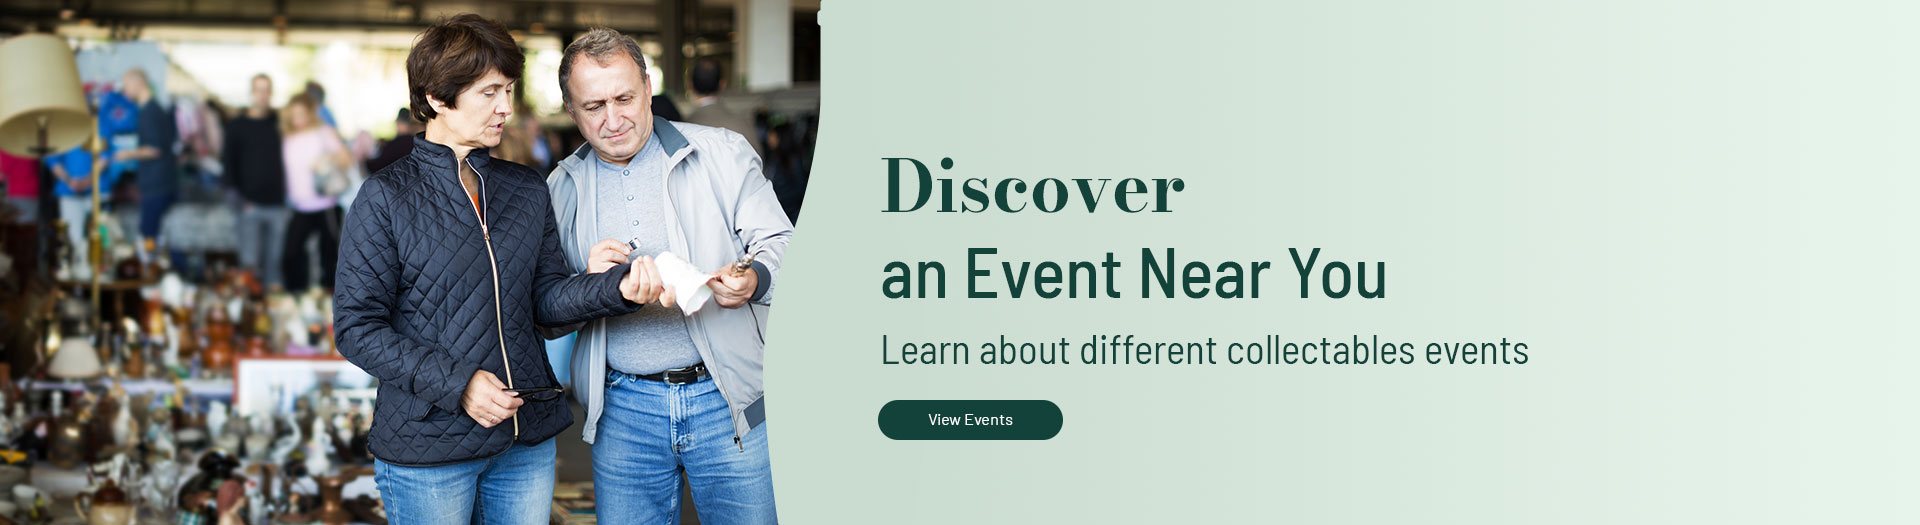 Discover events near you